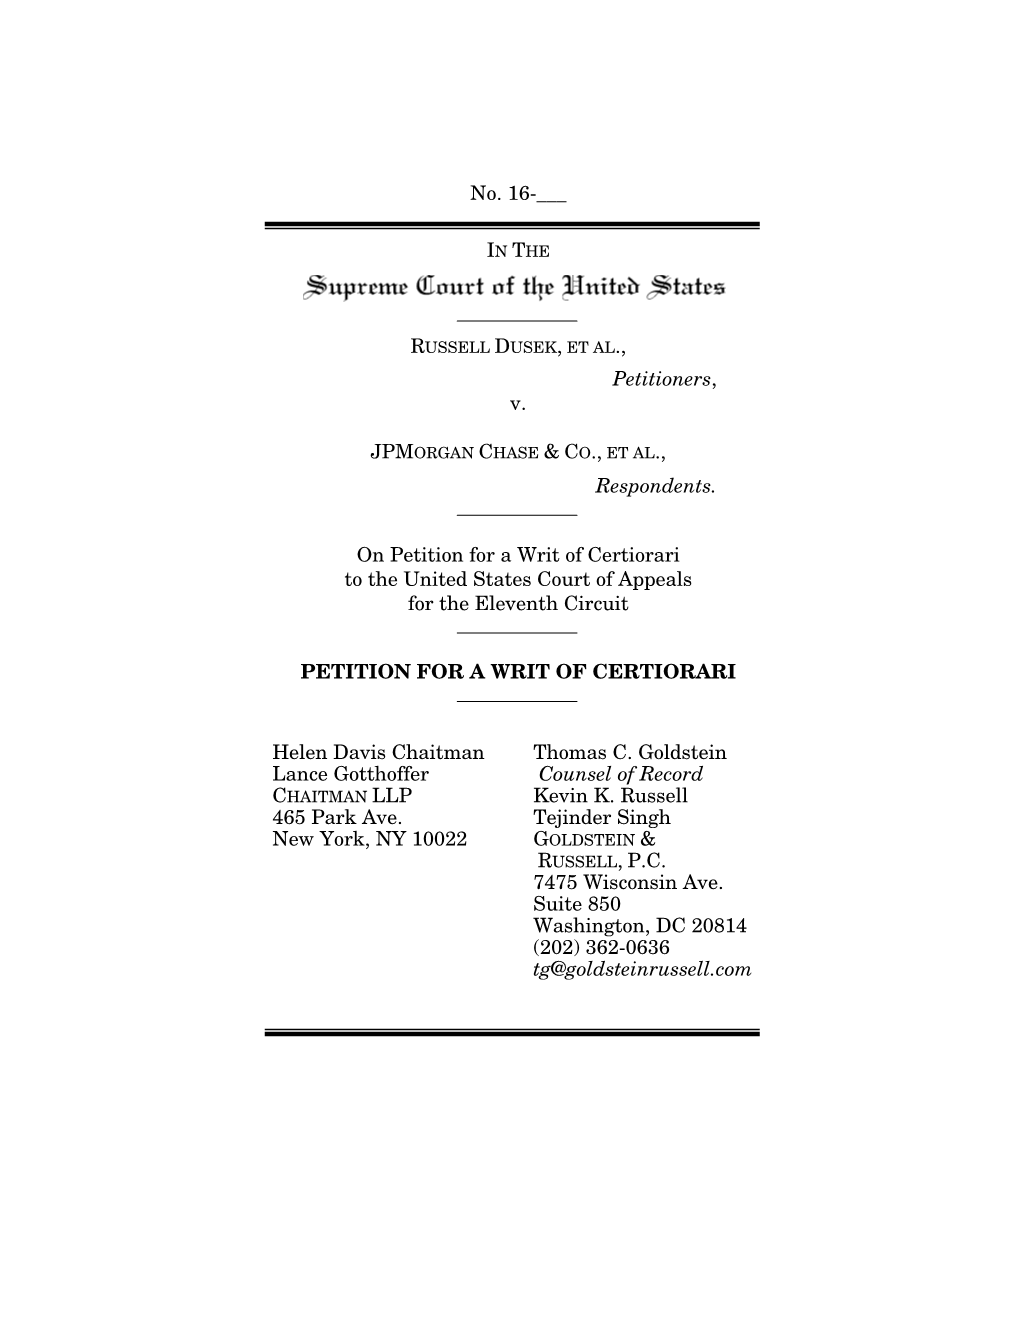 No. 16-___ Petitioners, V. JPMORGAN CHASE & CO., ET